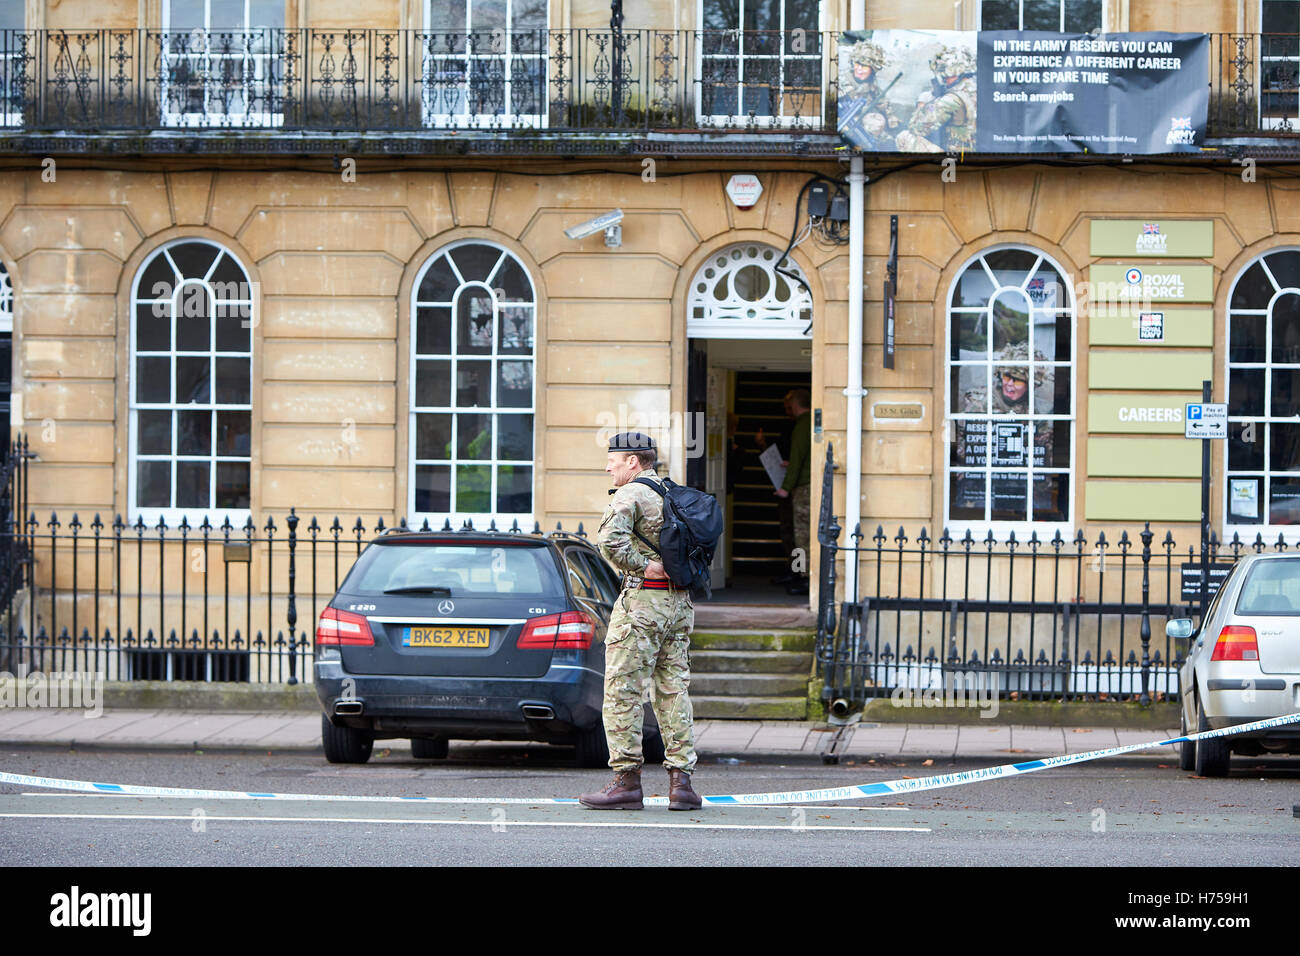 General view of scene following the discovery of a viable explosive device inside the army recruitment office in St Giles, Oxford Stock Photo